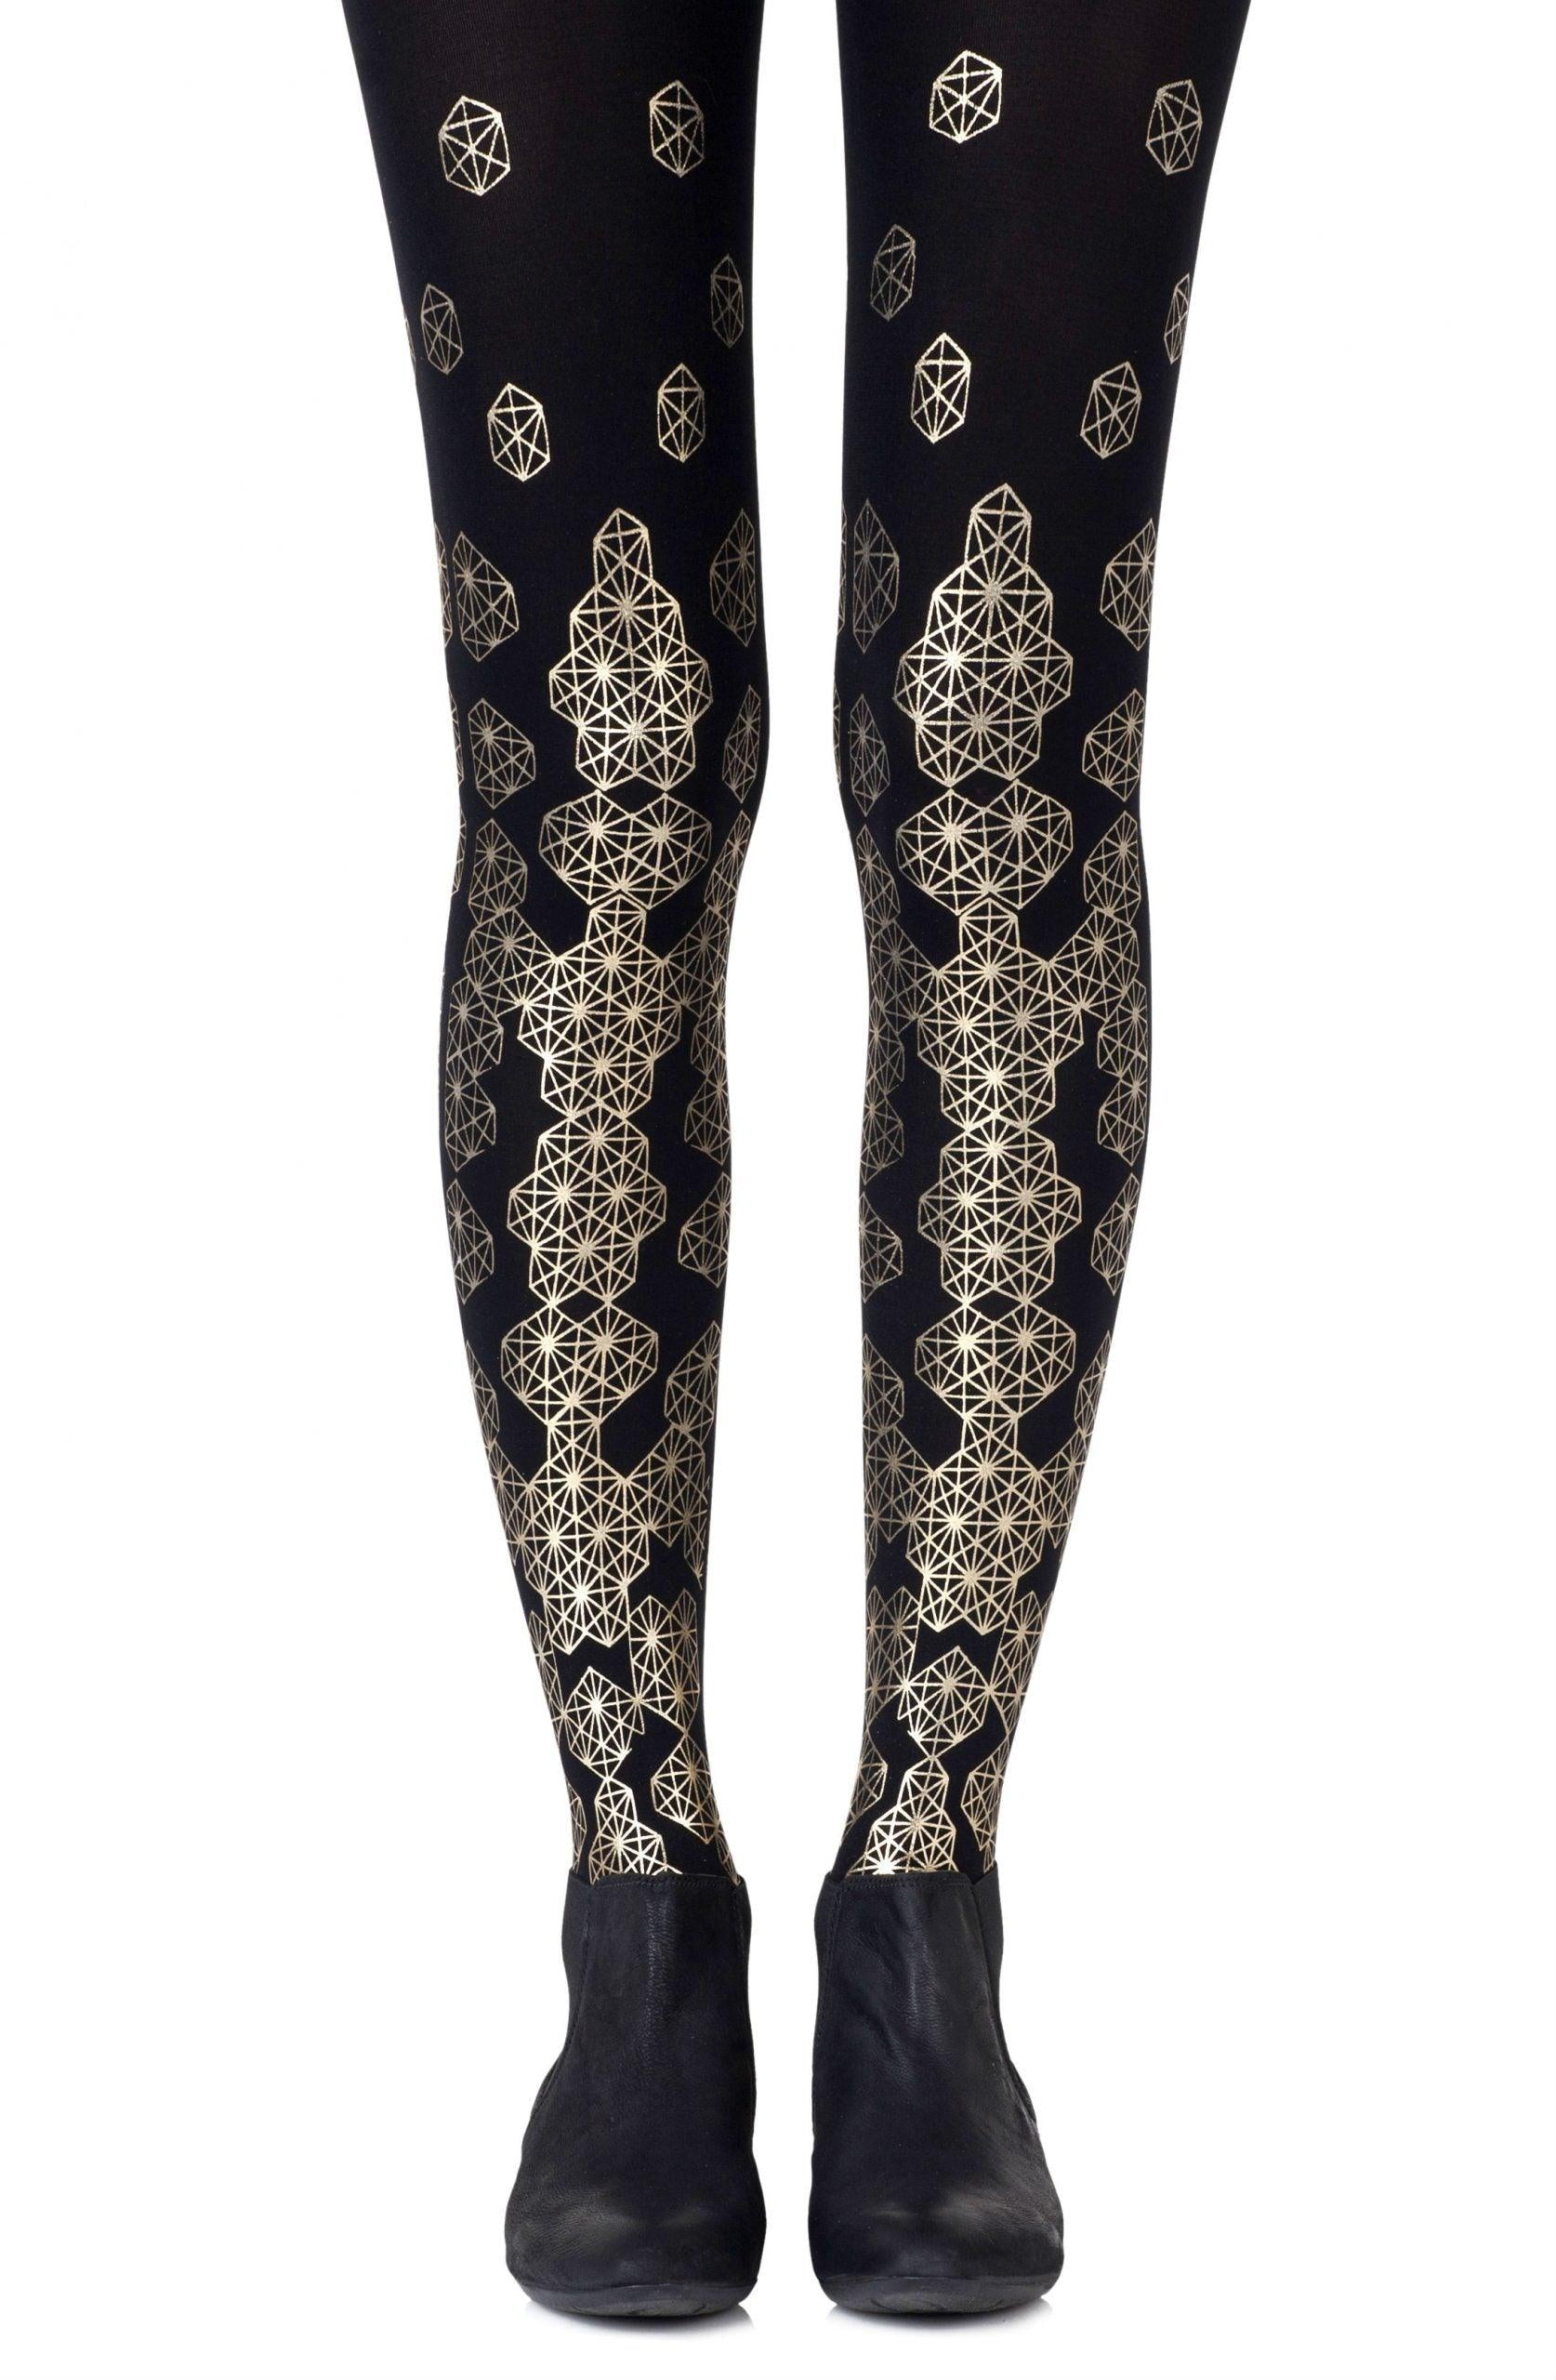 Zohara "Queen Bee" Gold Print Tights - Sydney Rose Lingerie 